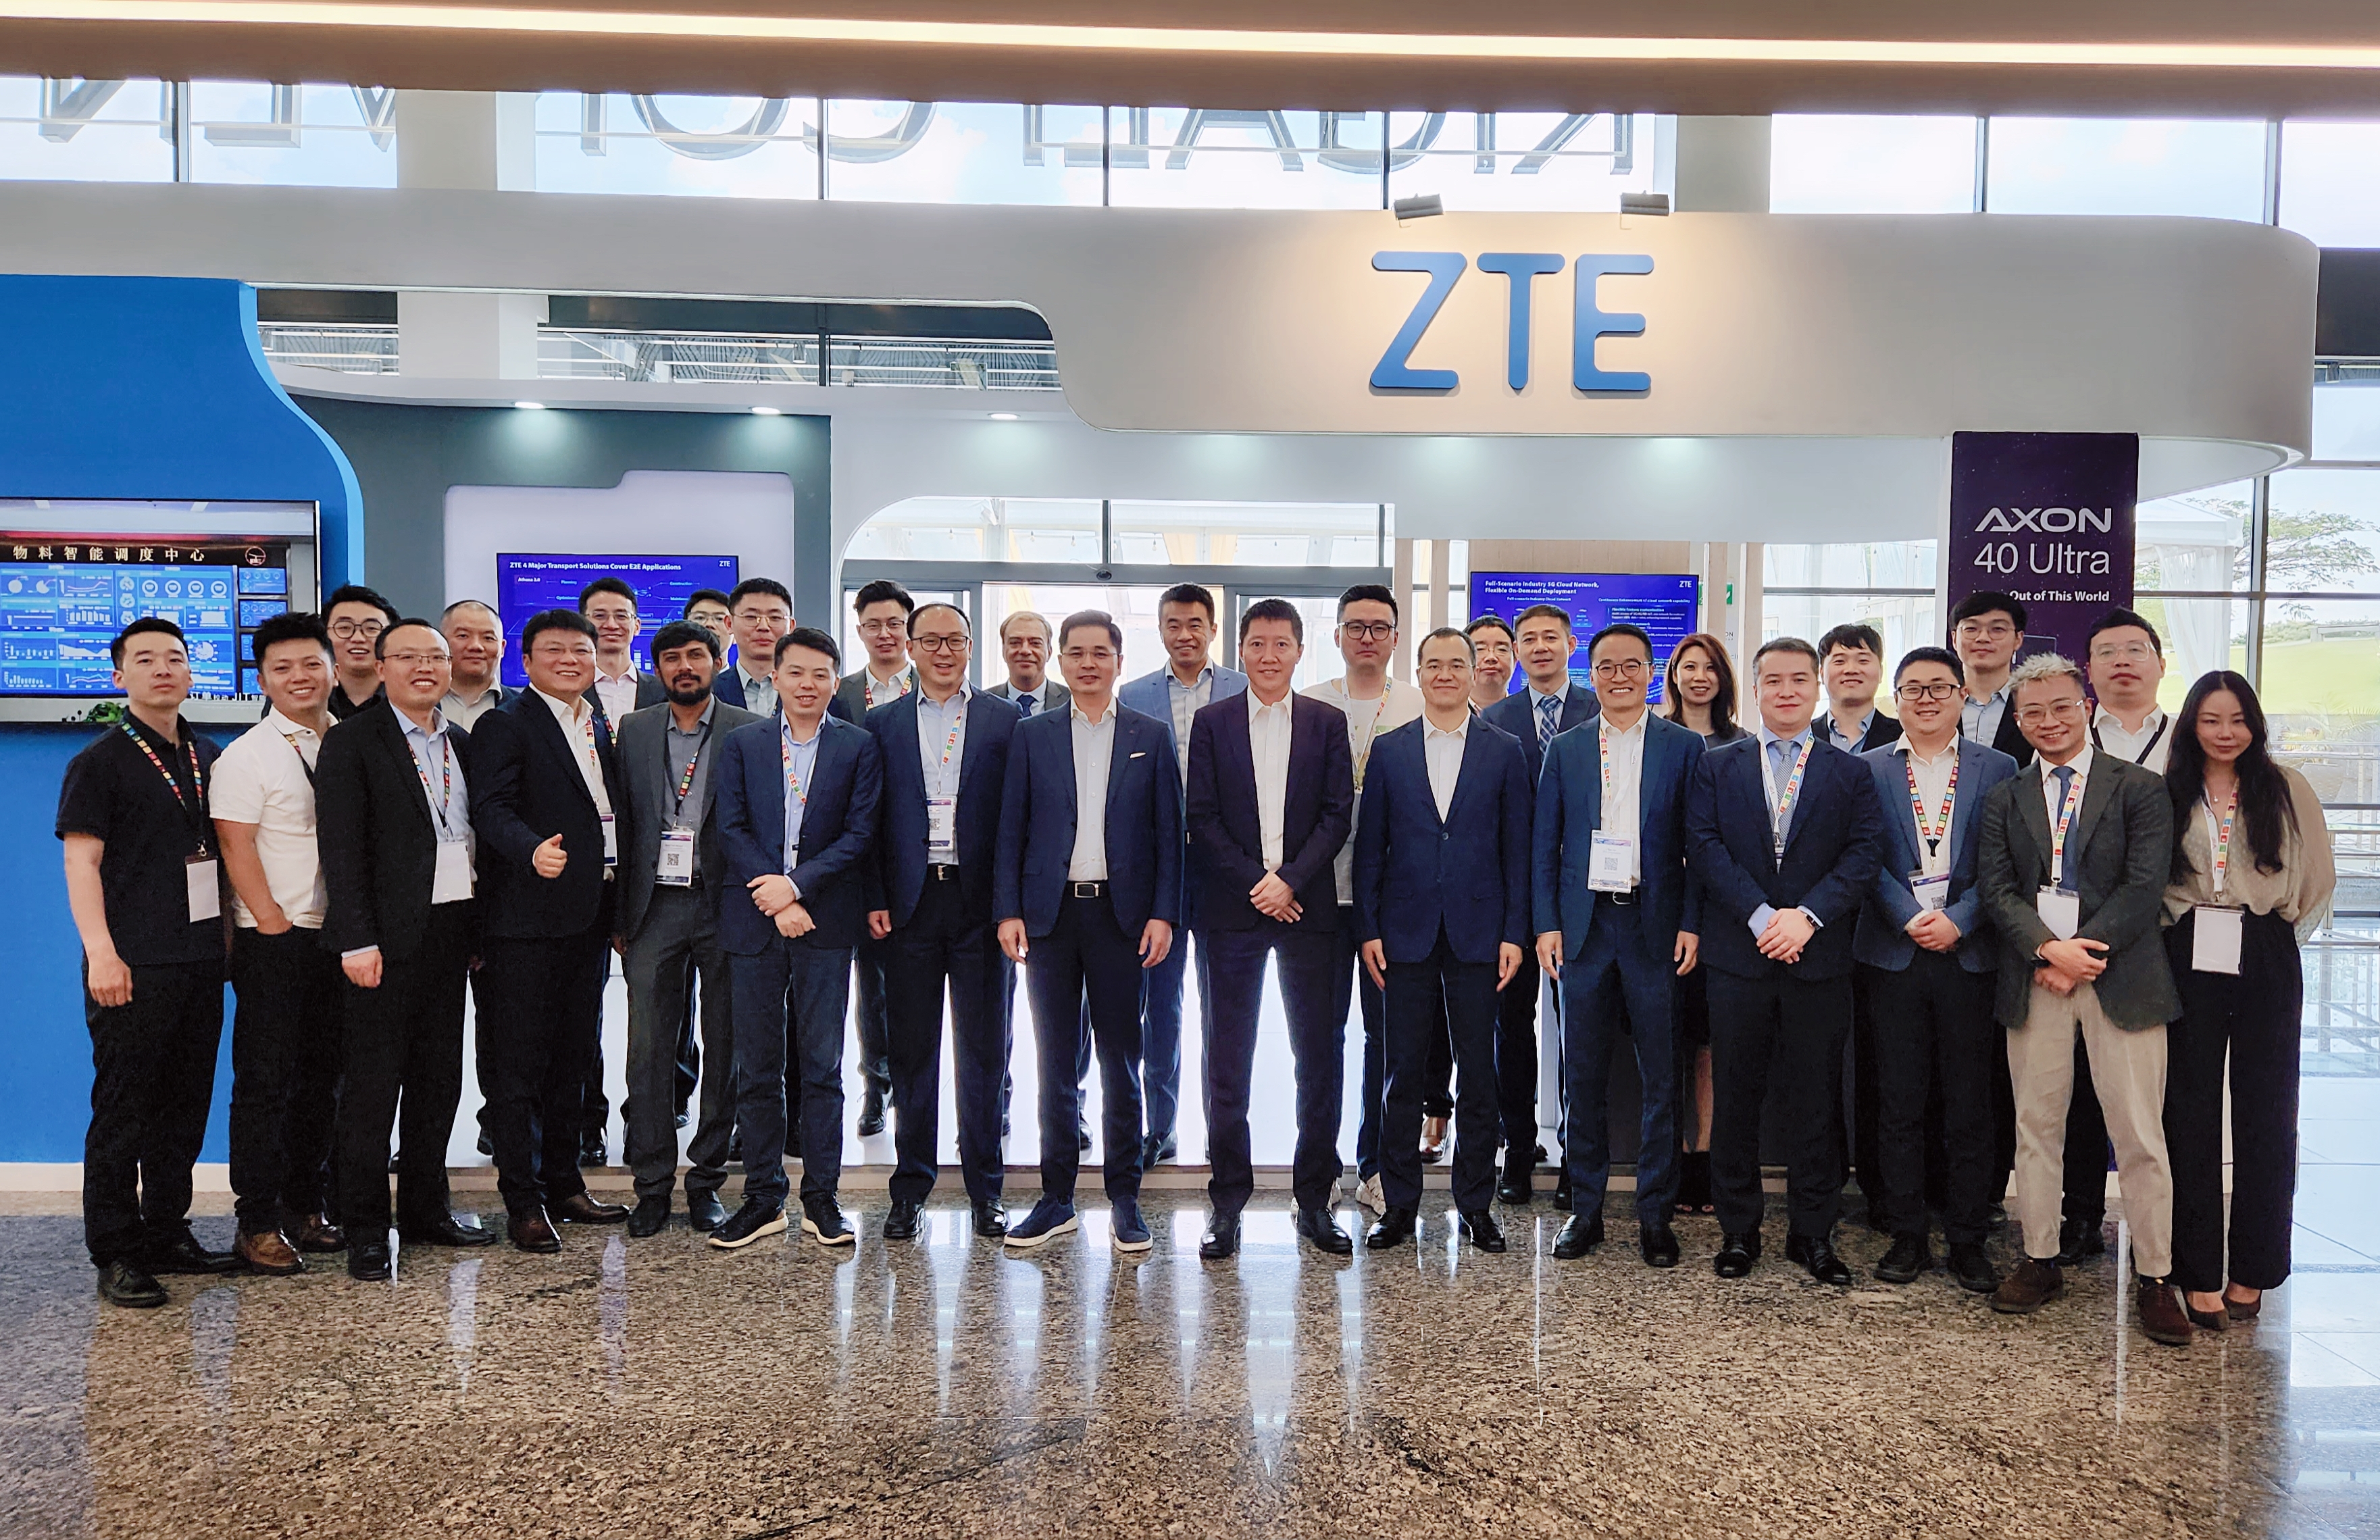 ZTE committed to unleashing Africa’s digital potential